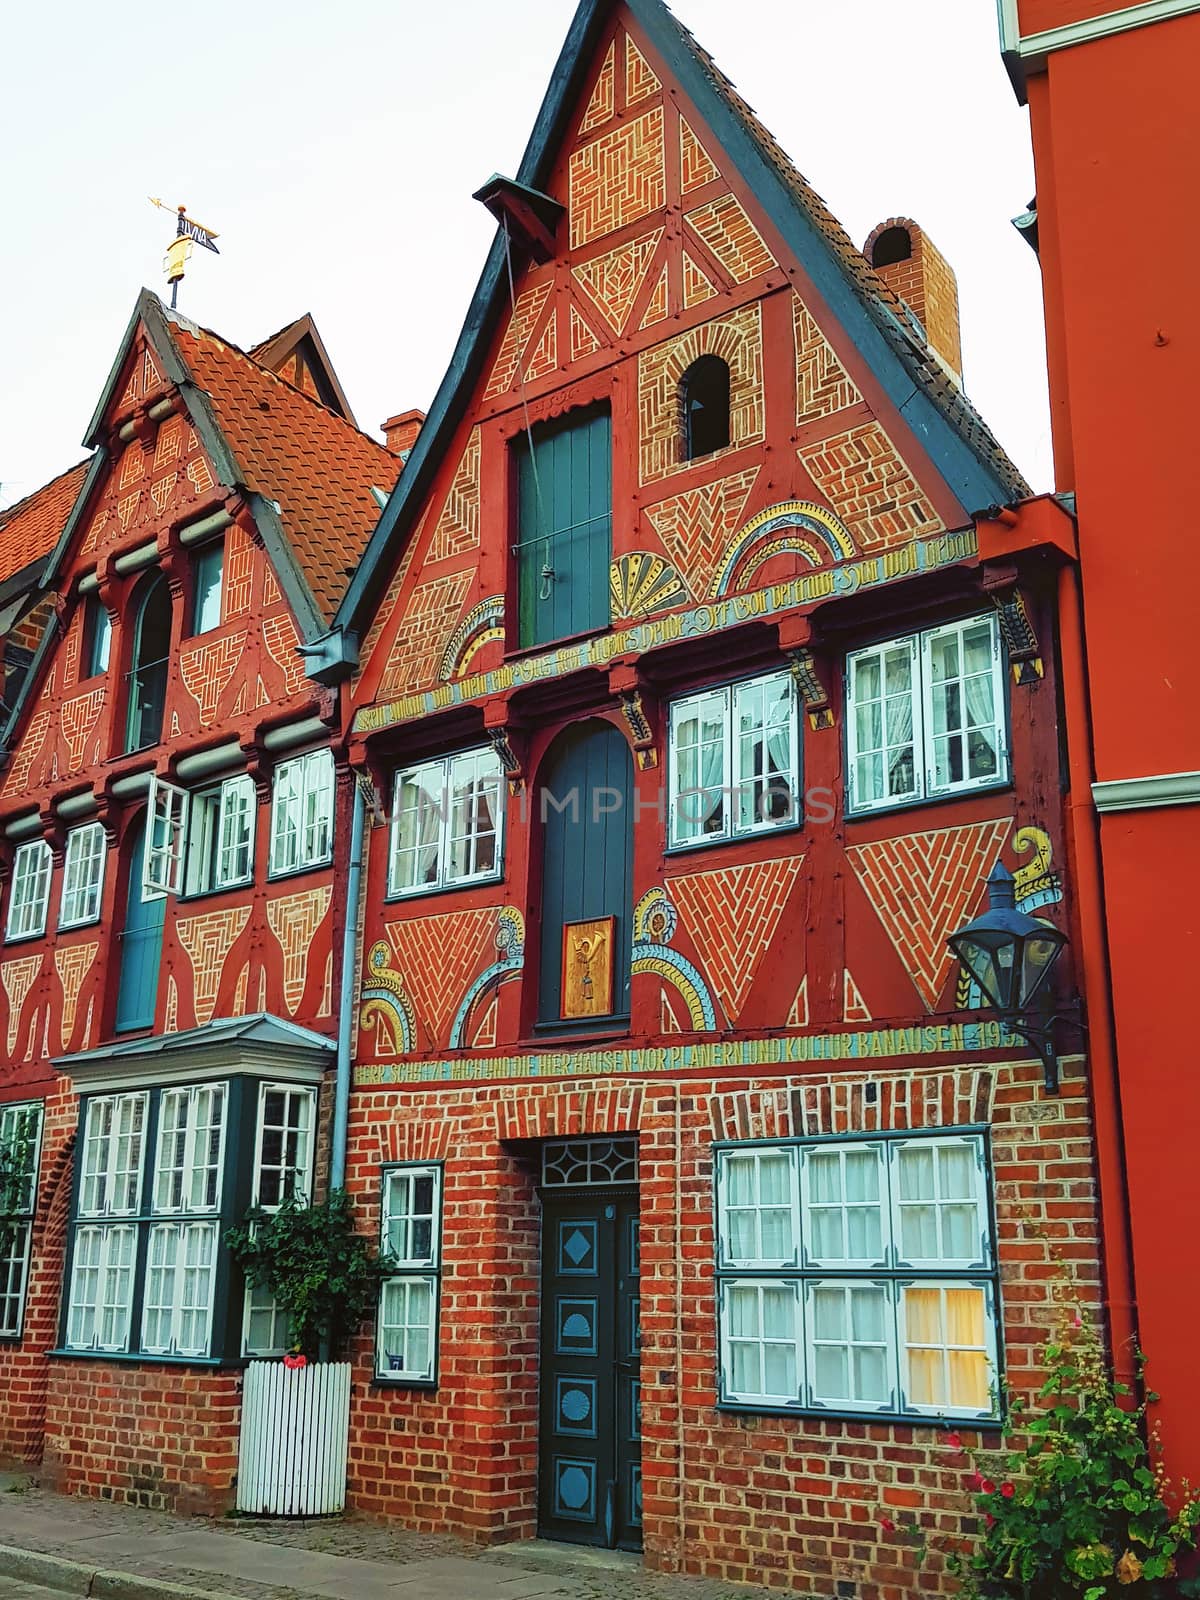 Half-timbered red brick houses near the river on the old harbor Lueneburg, Germany